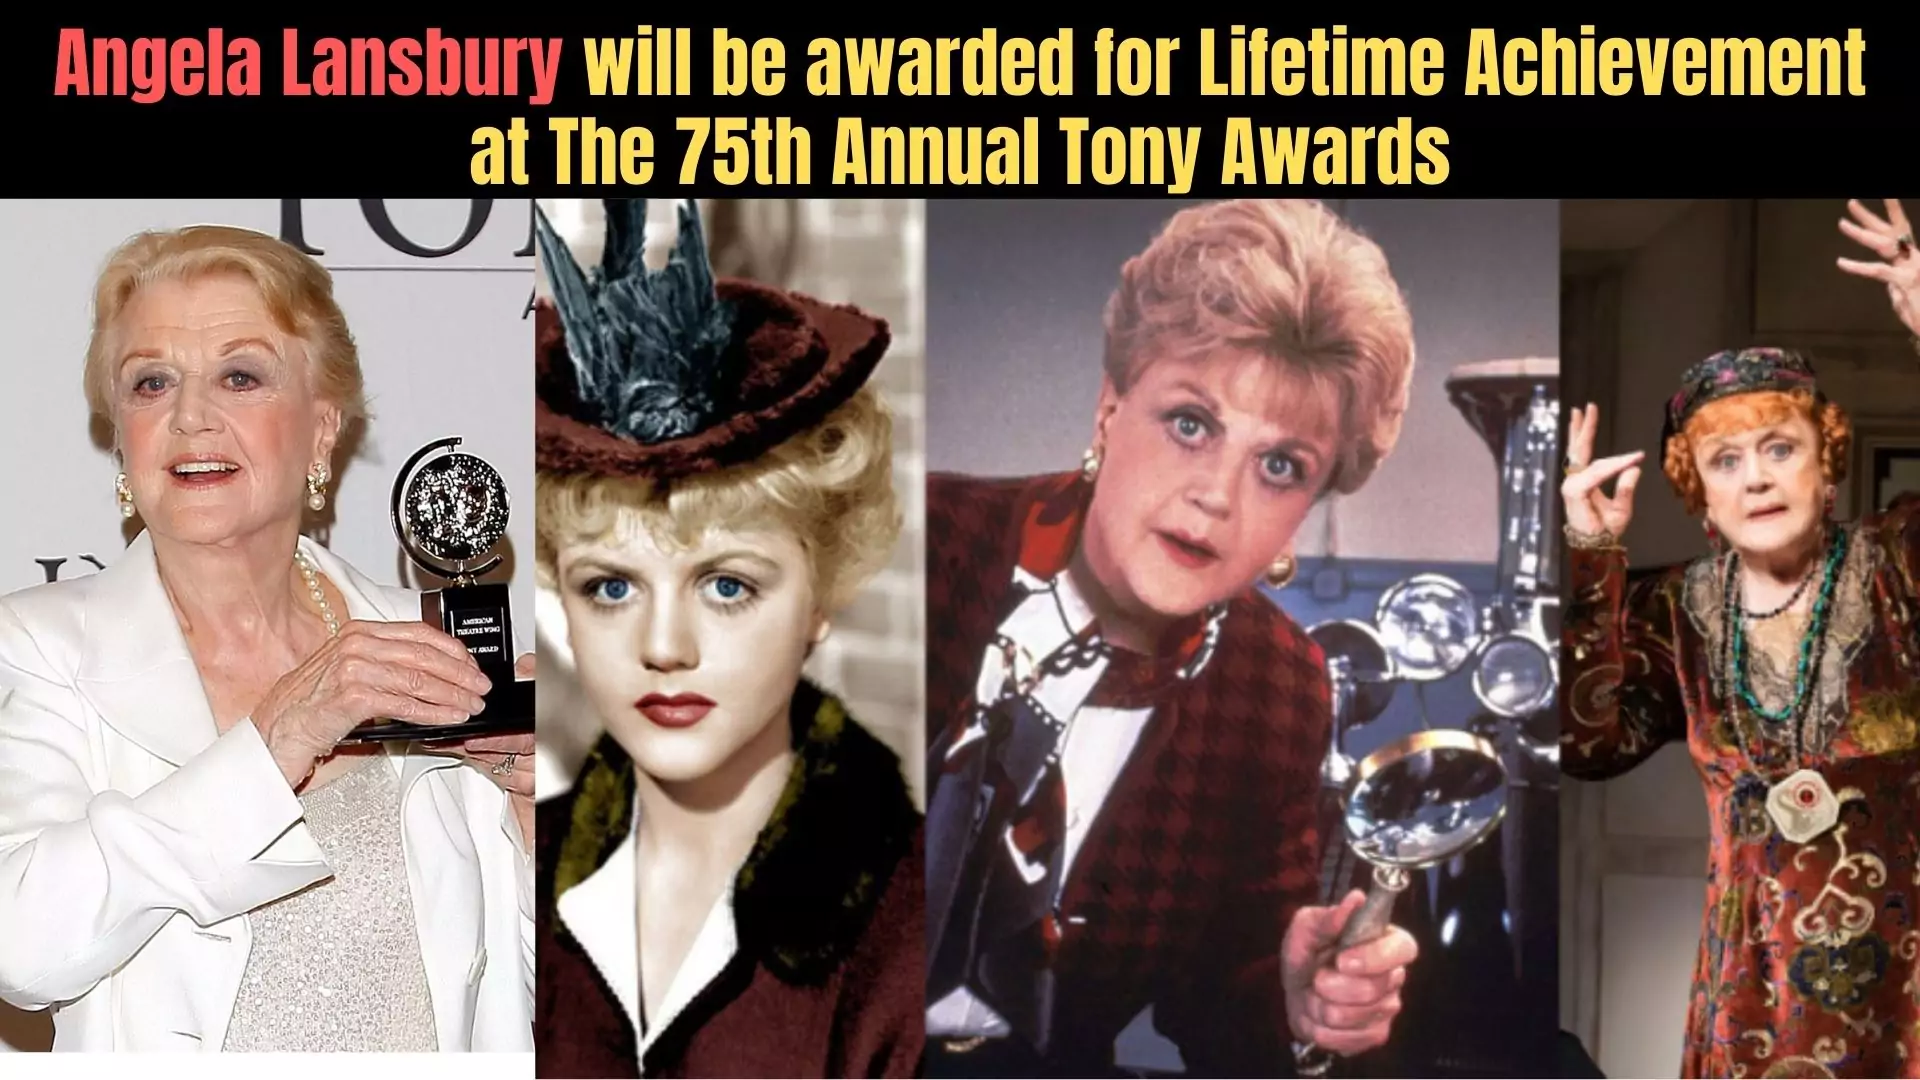 Angela Lansbury will be awarded for Lifetime Achievement at The 75th Annual Tony Awards